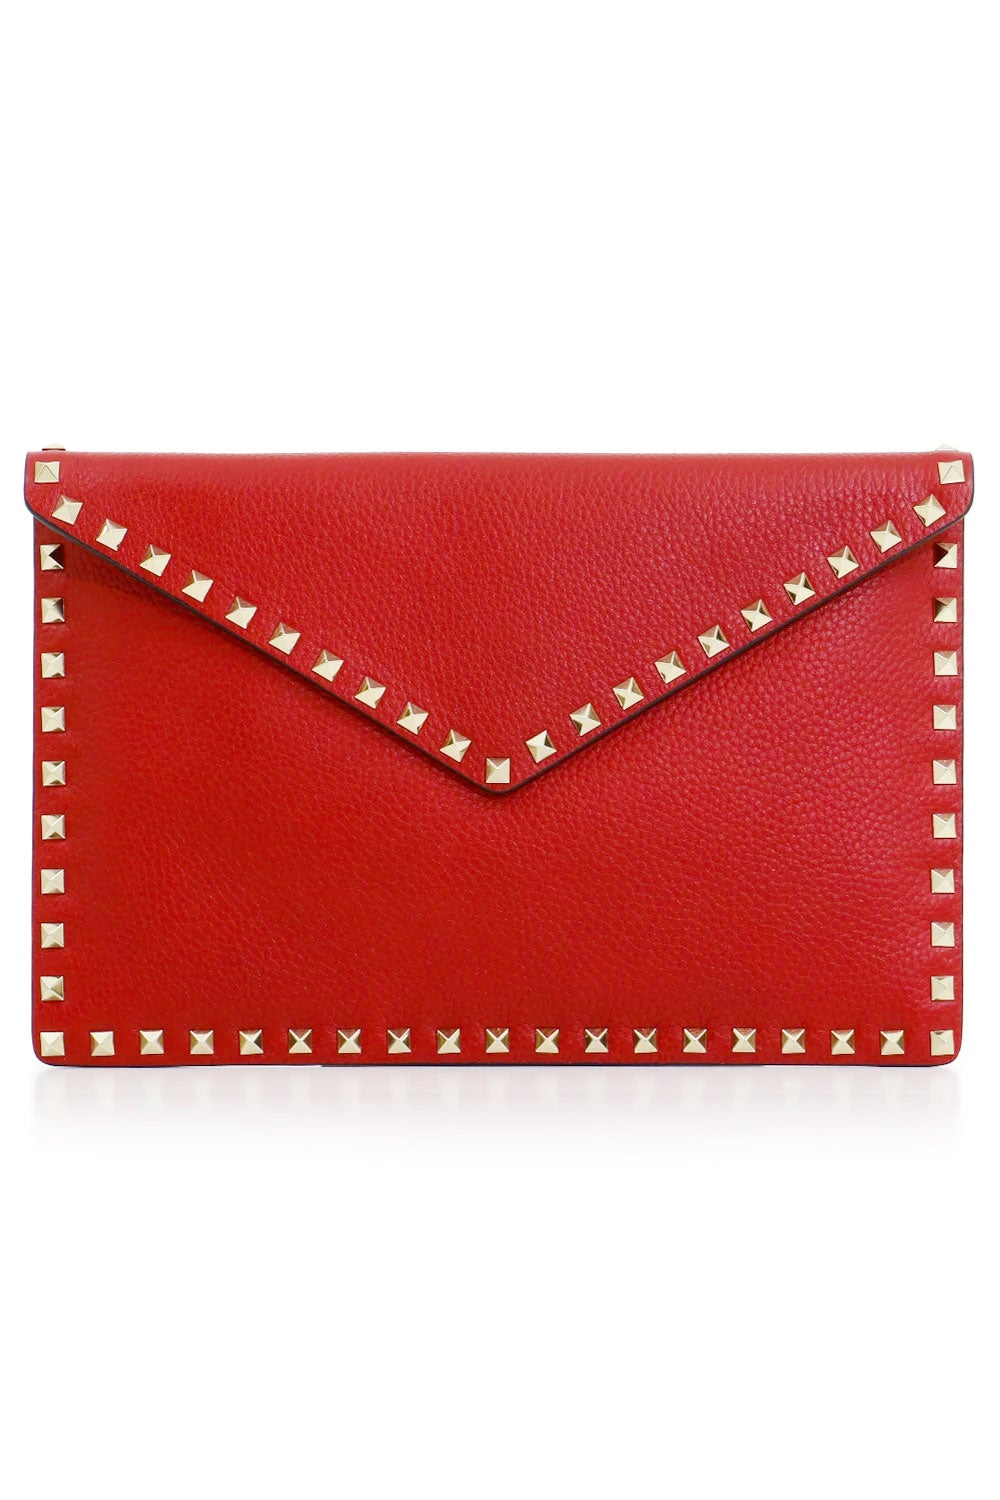 VALENTINO BAGS RED ROCKSTUD LARGE POUCH GRAINED | ROUGE PUR